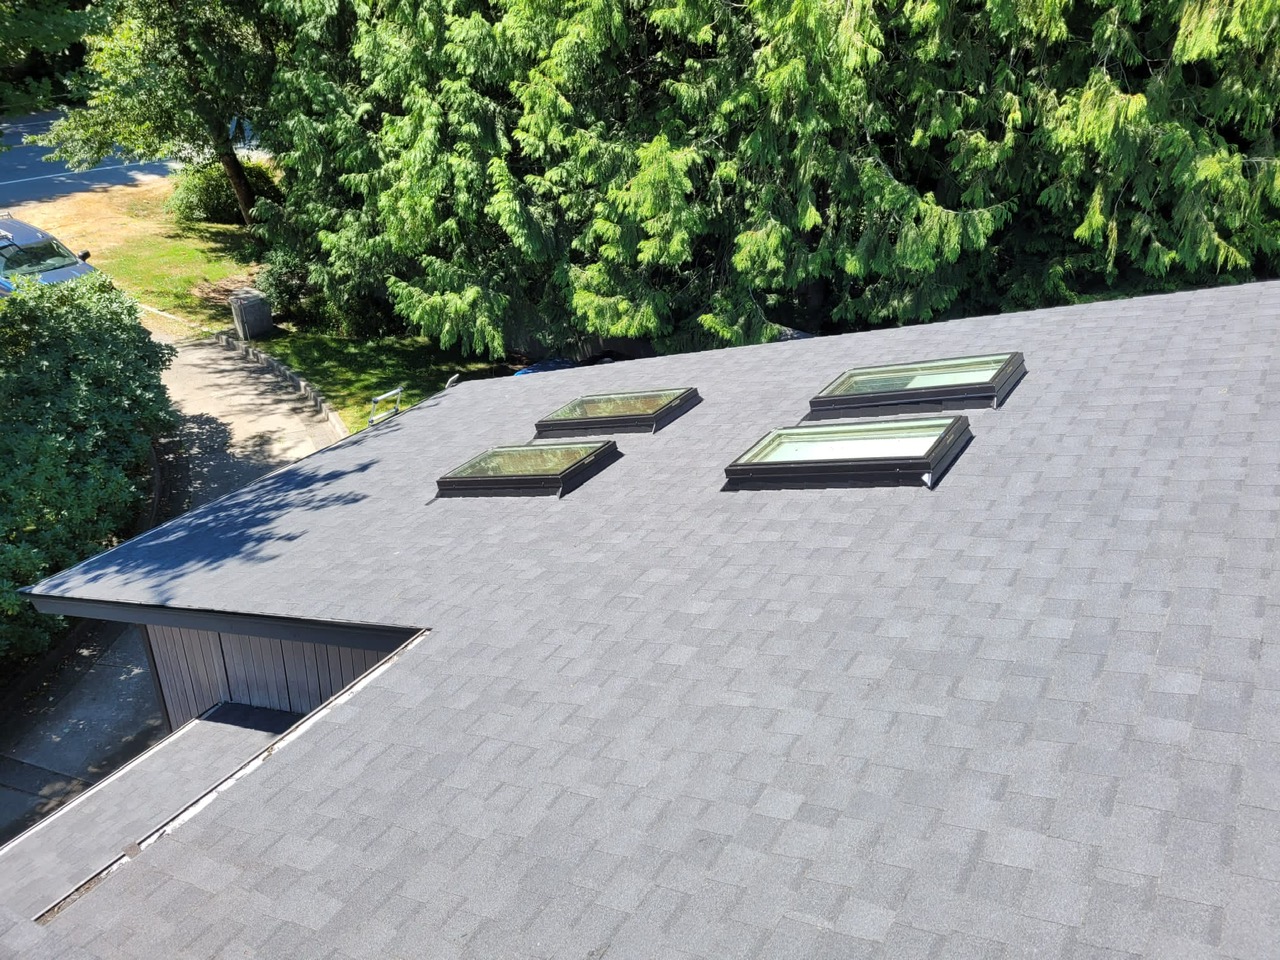 New roof and skylights in Squamish, BC